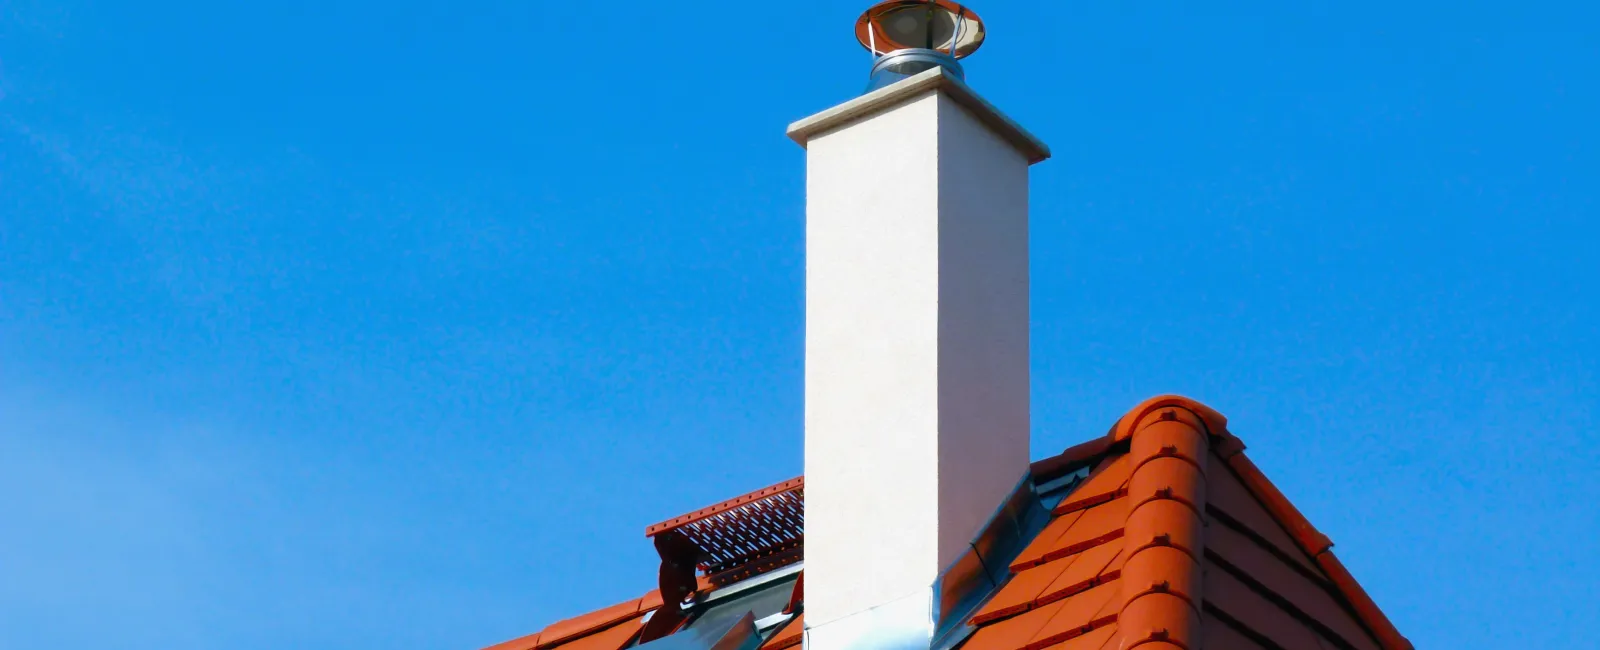 What Is Flashing On A Roof?